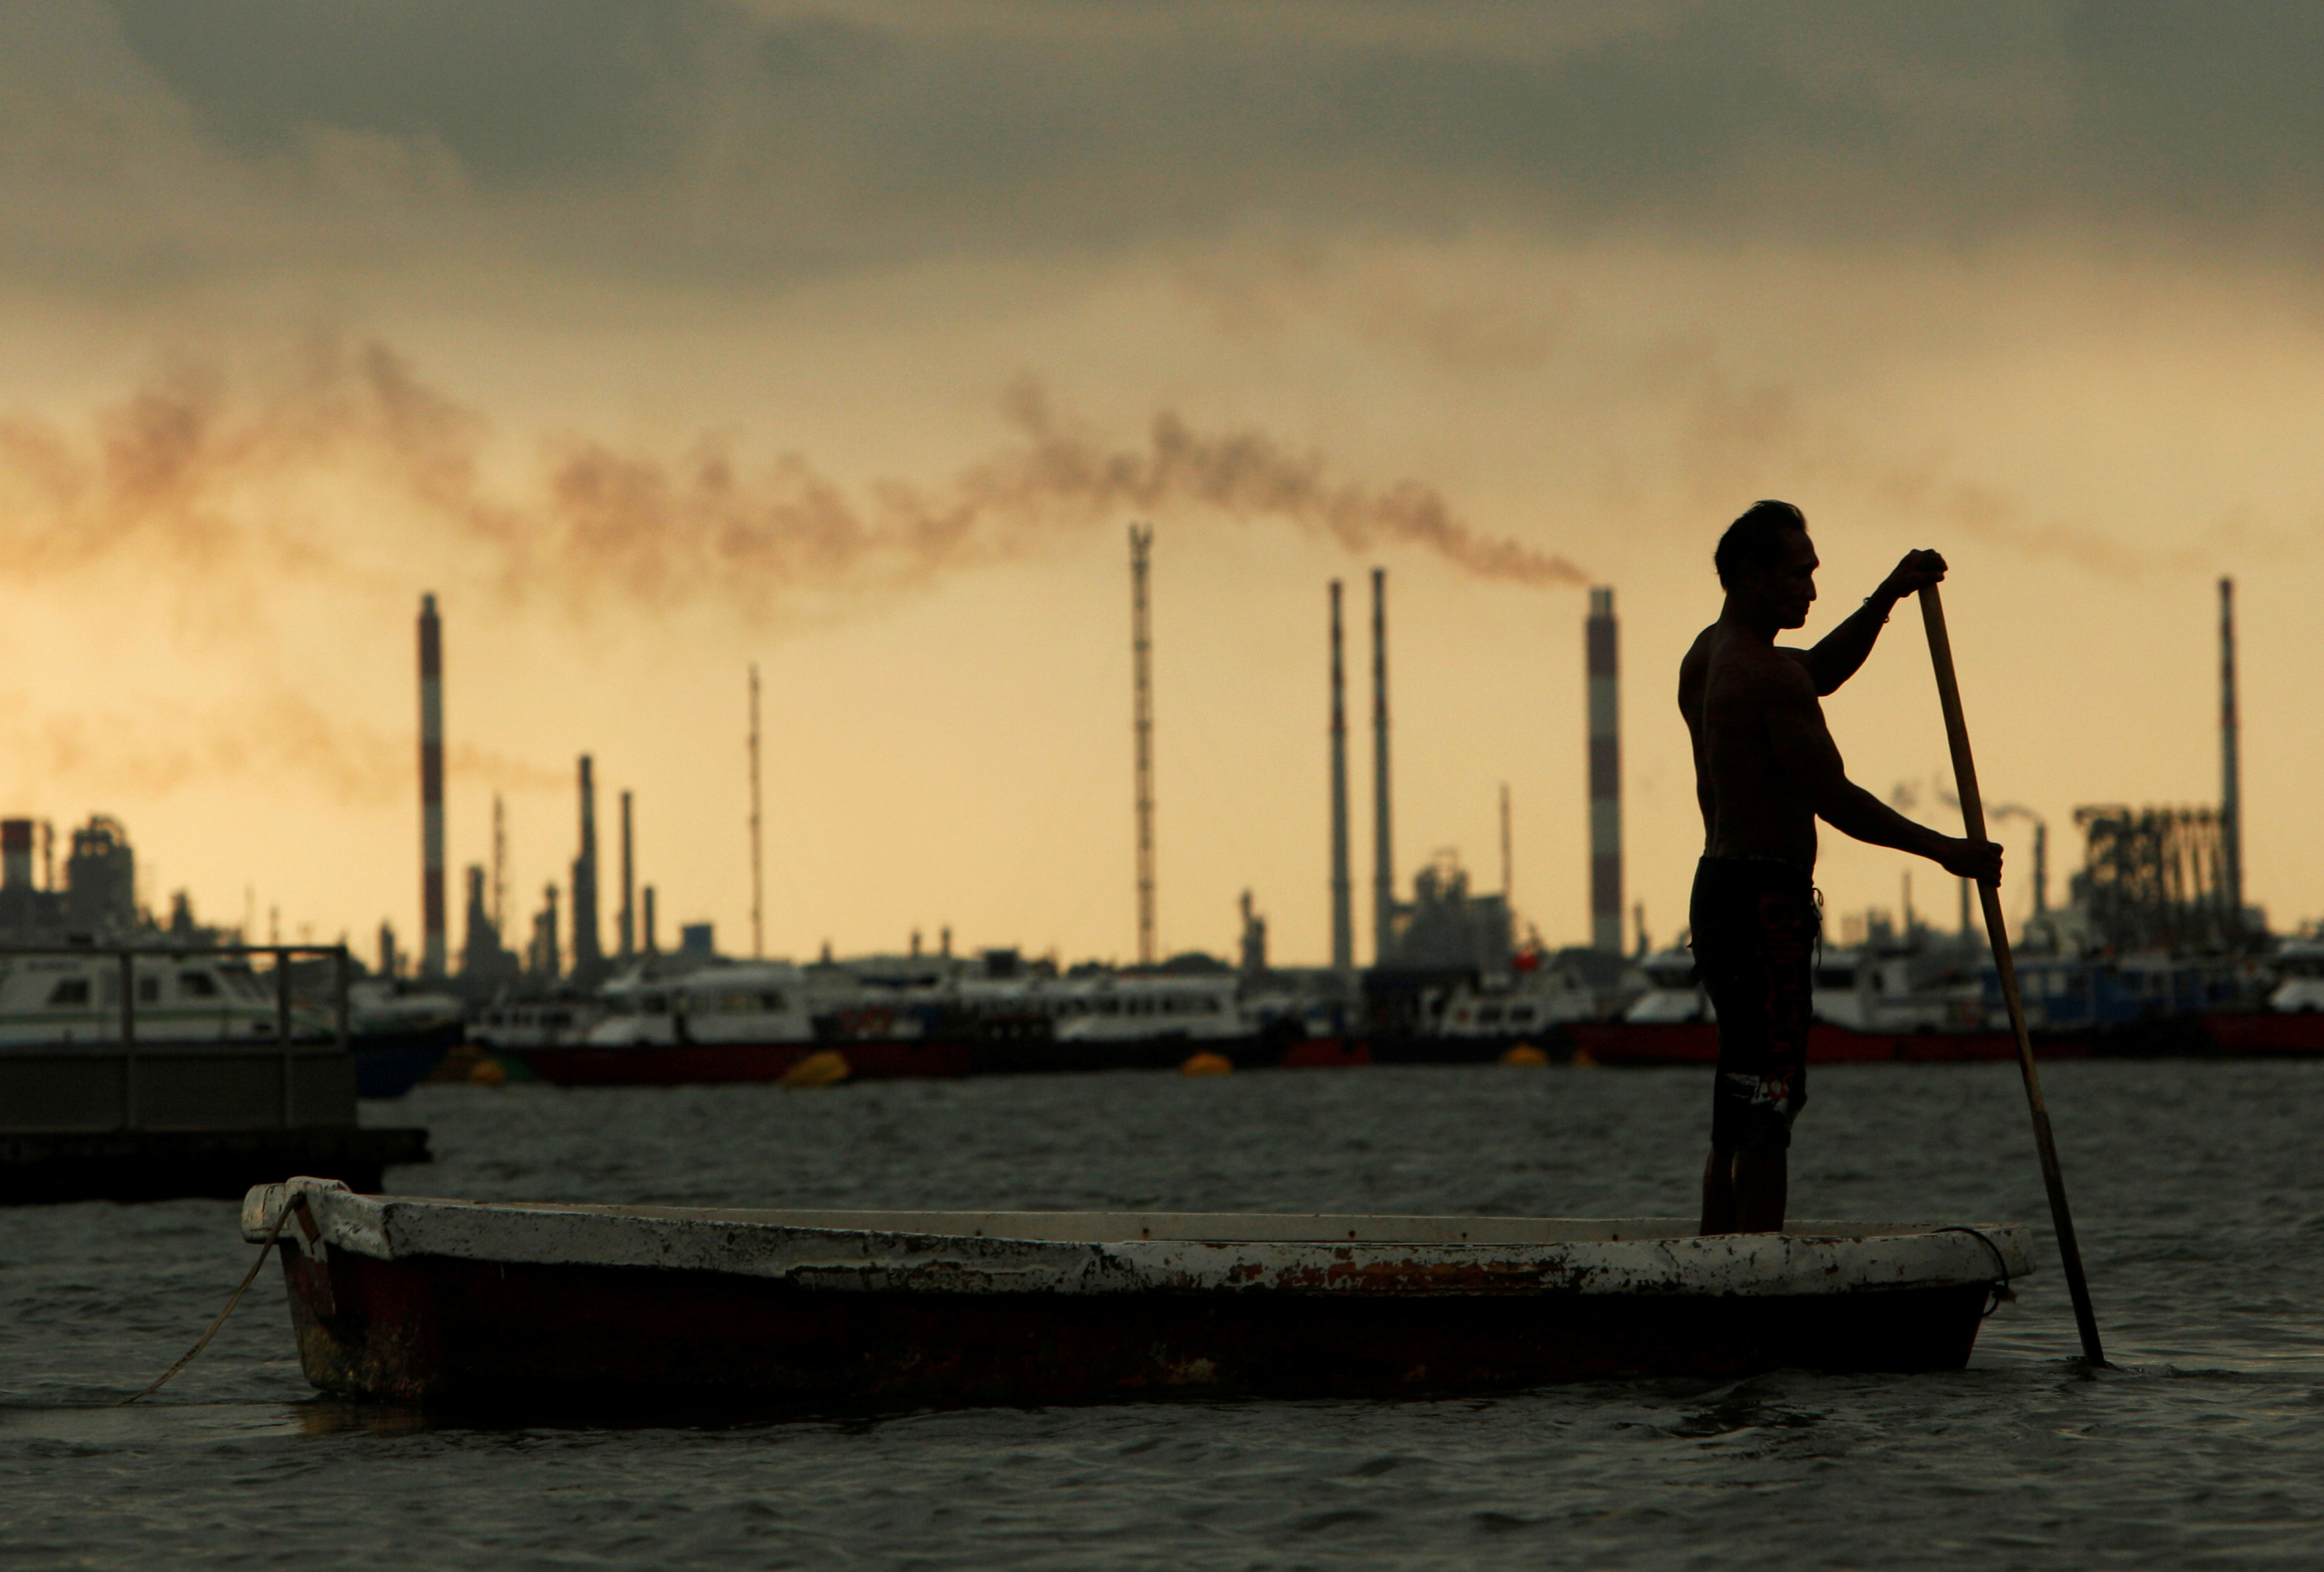 A fisherman rows his dinghy past oil refineries near port terminals in Singapore